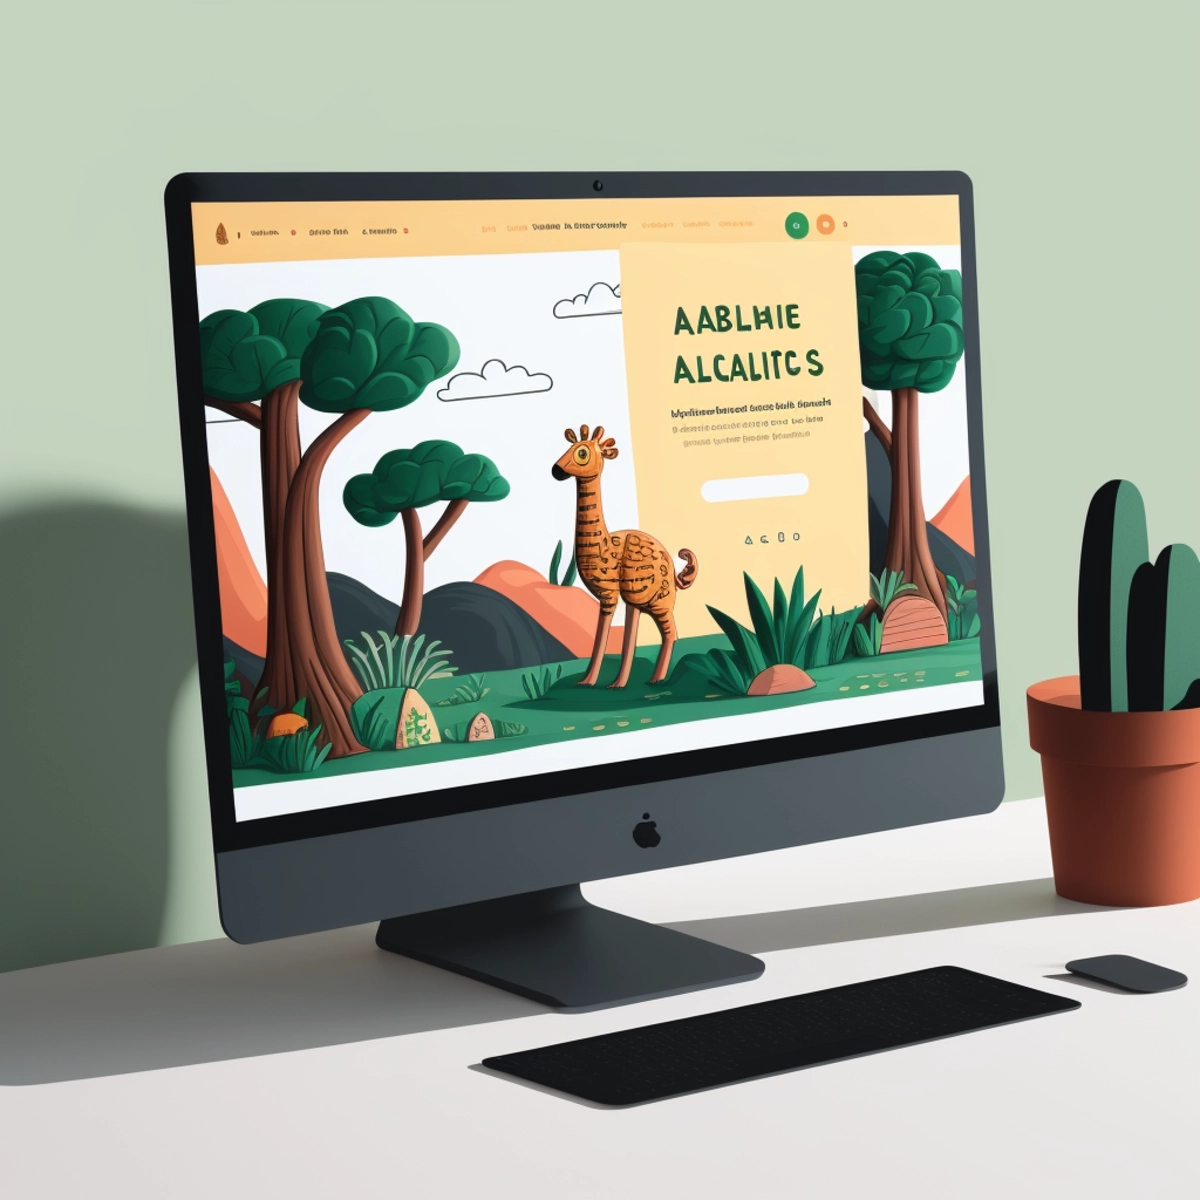 An educational website on monitor, incorporating playful illustrations